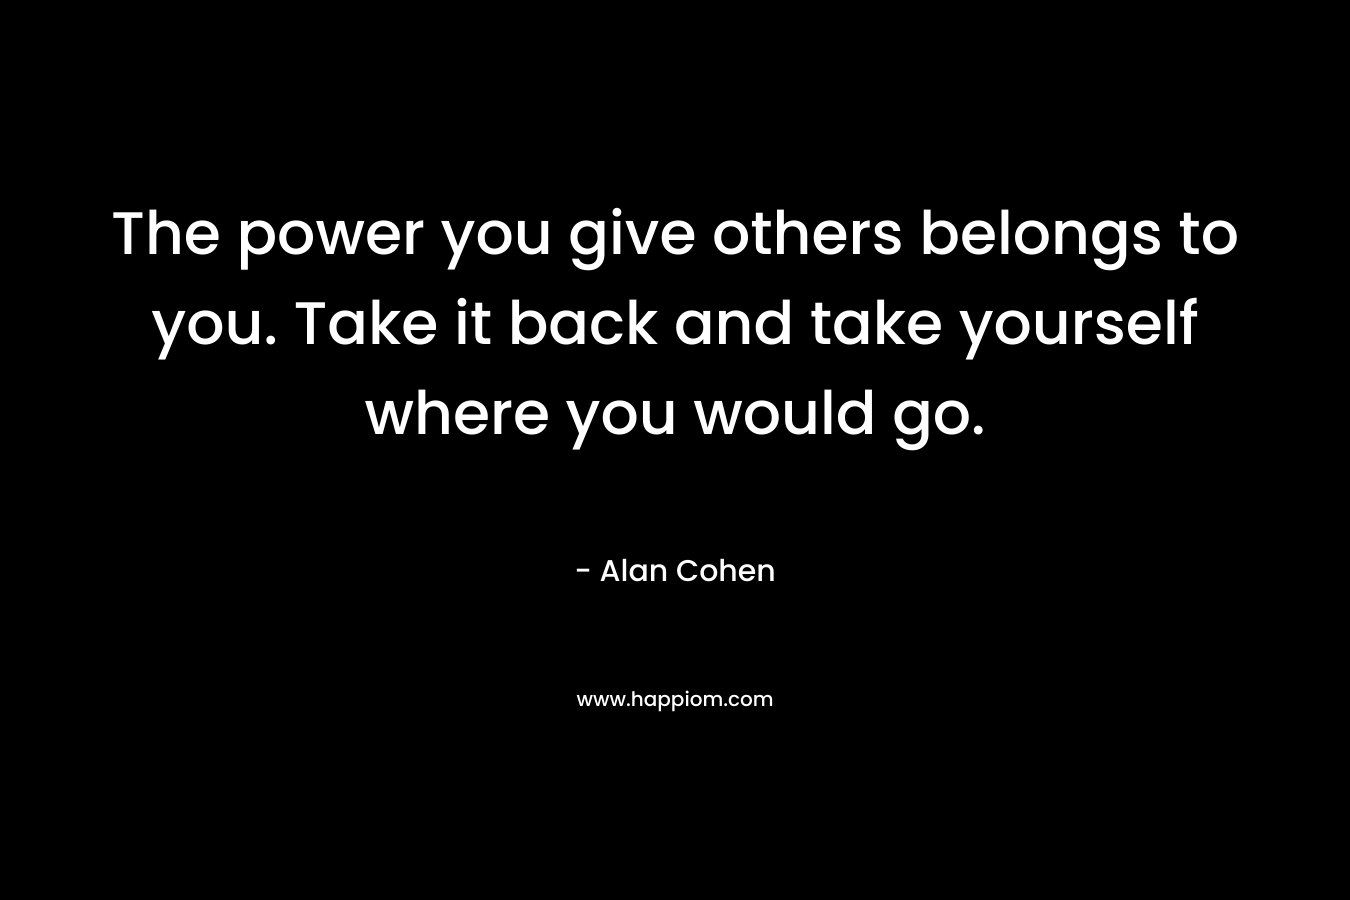 The power you give others belongs to you. Take it back and take yourself where you would go.